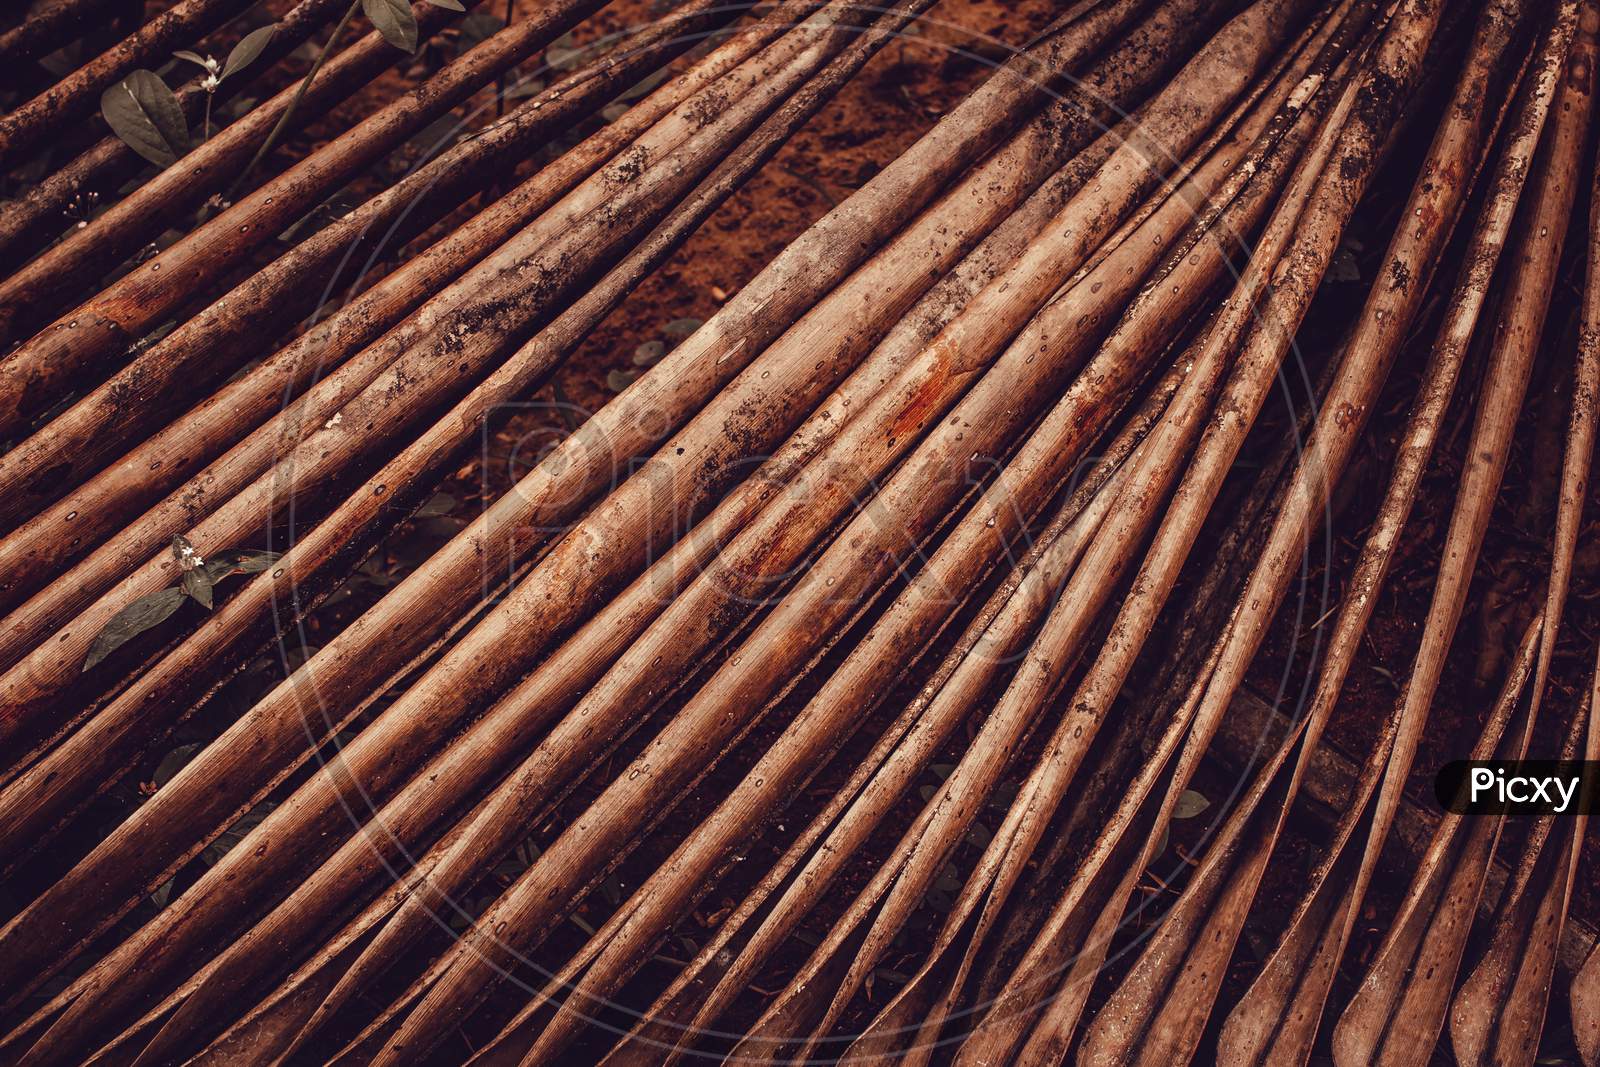 View Of A Dried And Fallen Coconut Leaves